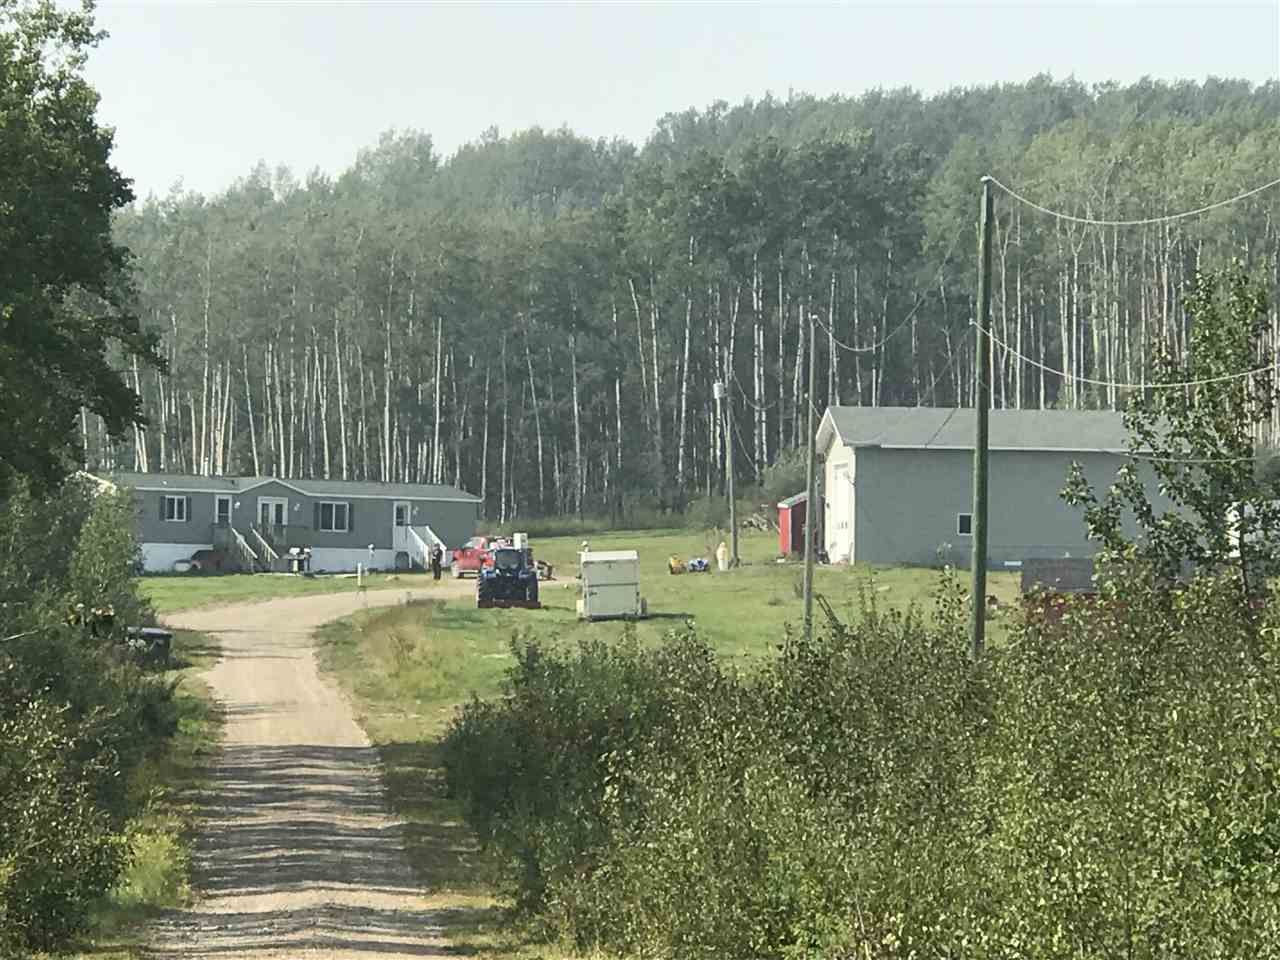 Main Photo: 14466 275 Road in Charlie Lake: Lakeshore Manufactured Home for sale (Fort St. John (Zone 60))  : MLS®# R2299430